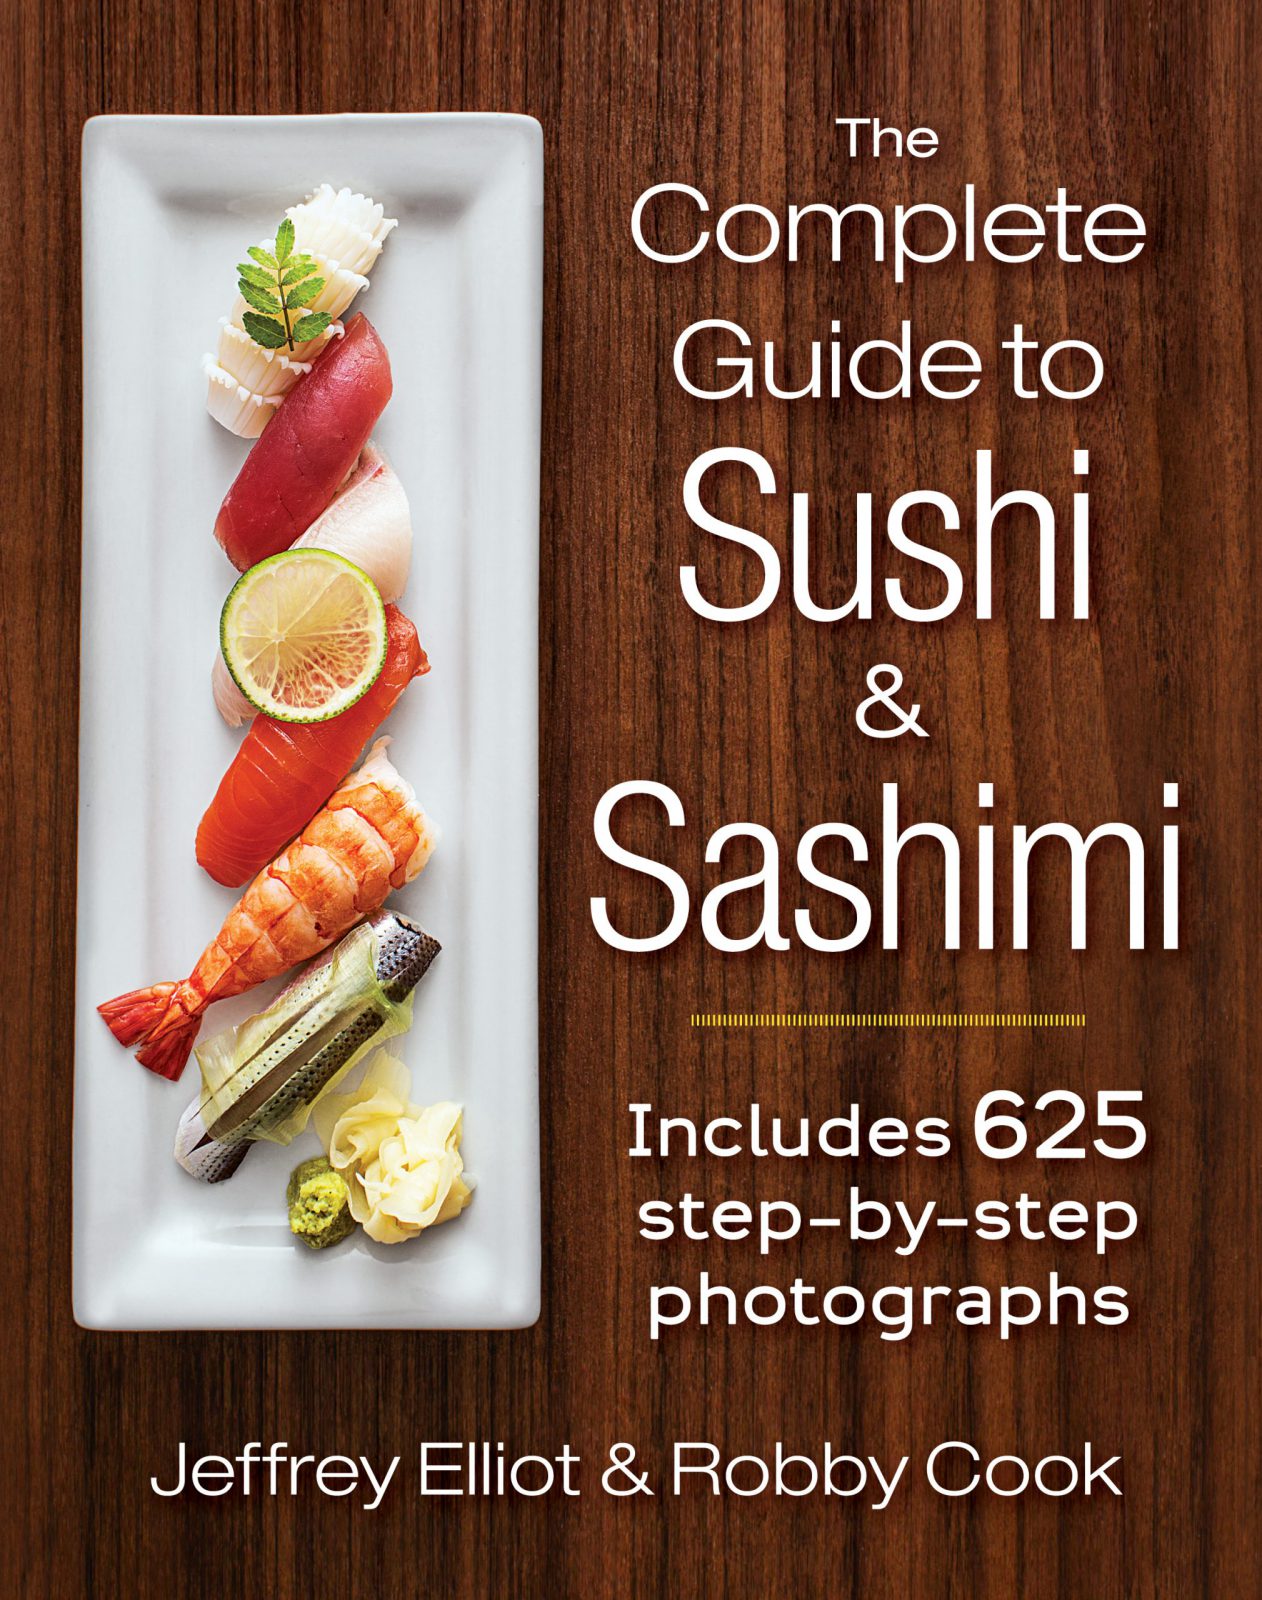 The Complete Guide to Sushi and Sashimi